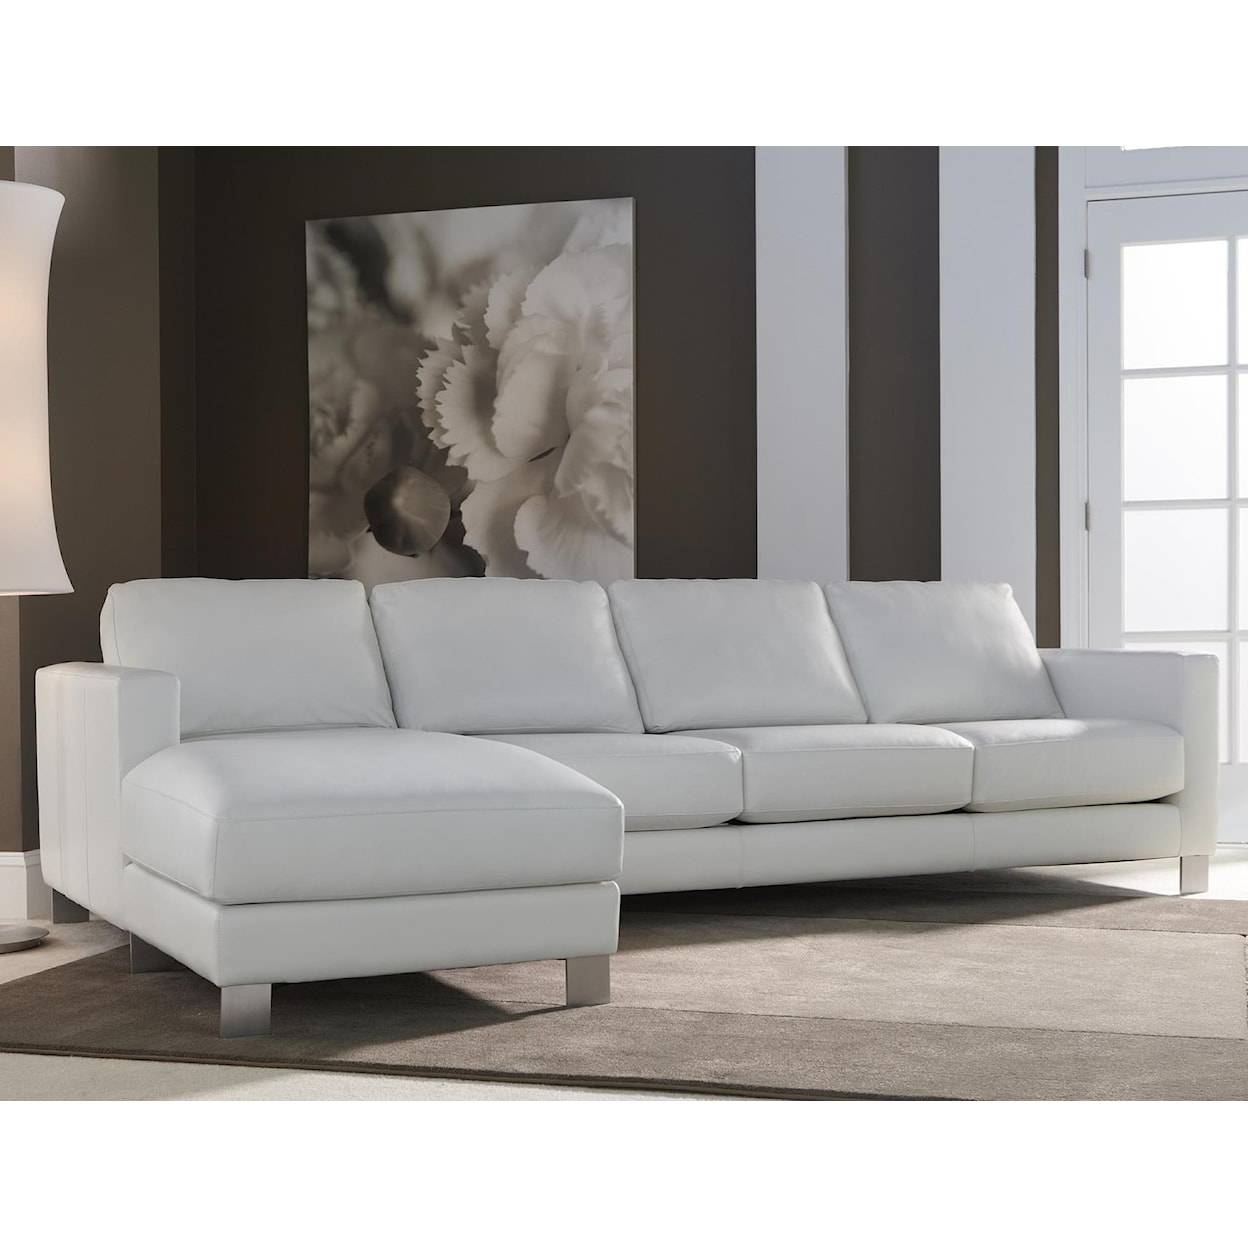 American Leather Alessandro Sofa with Chaise